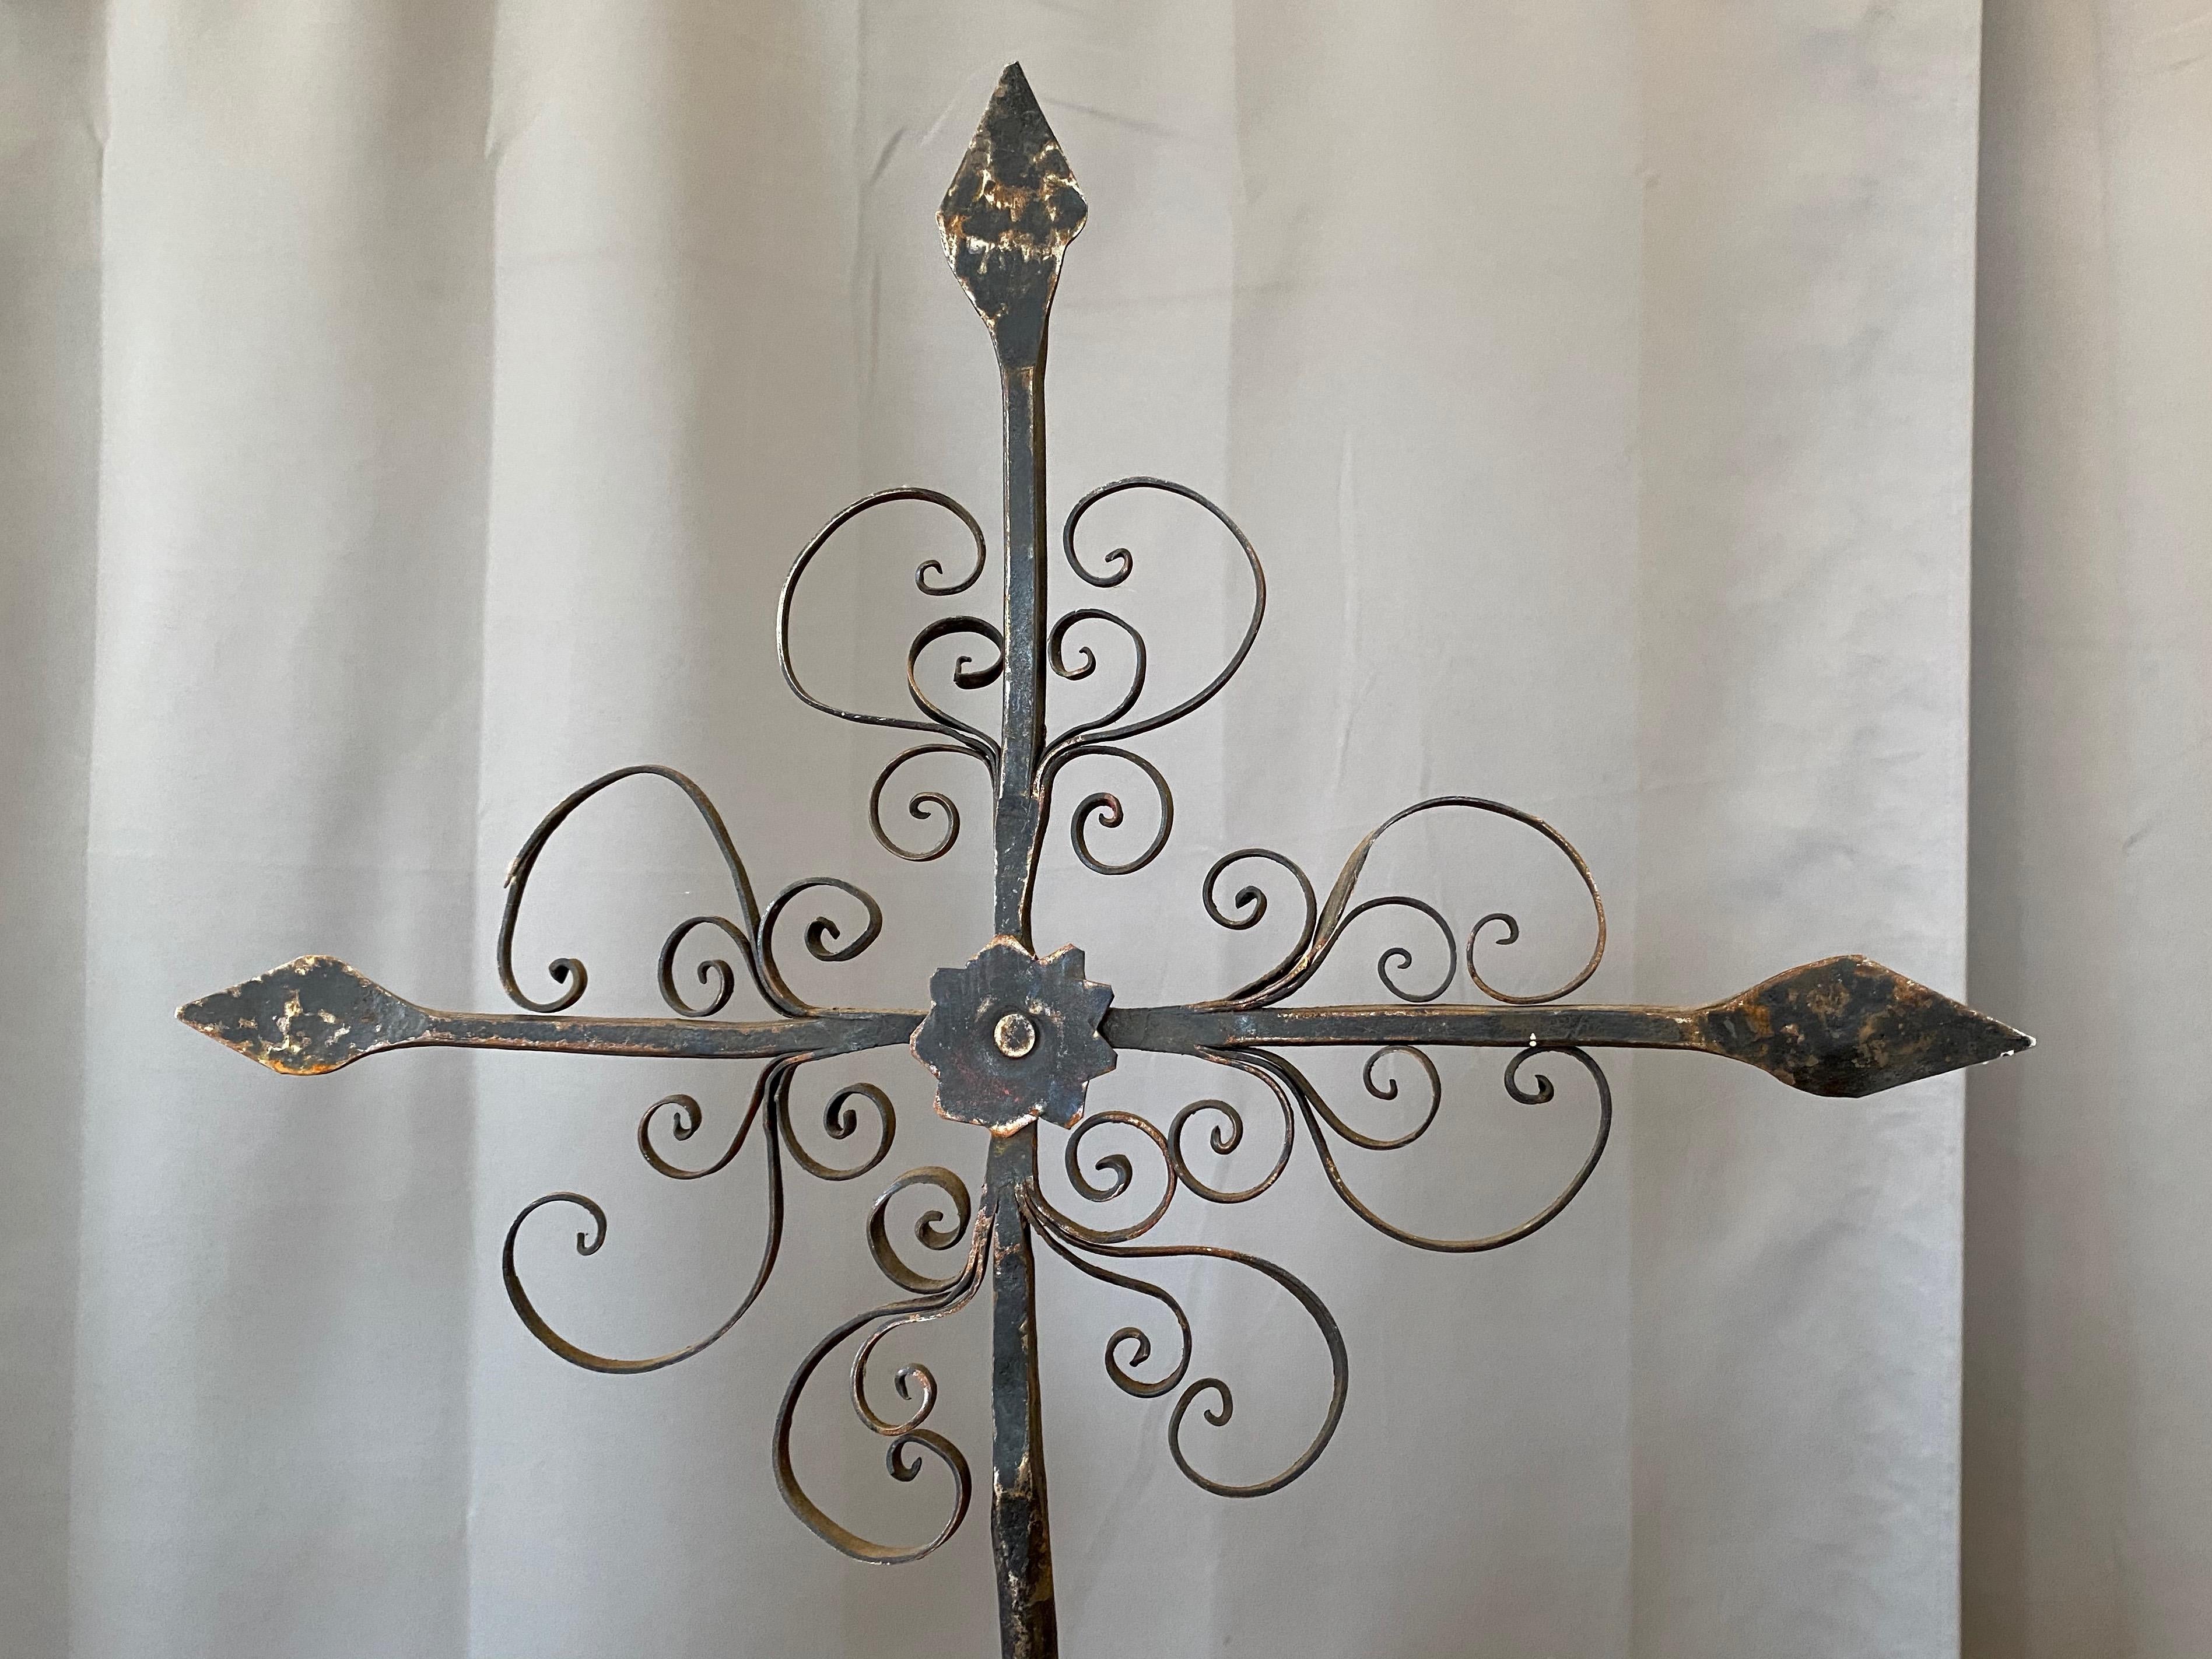 Large Mexican Folk Art Wrought Iron Rooster Weathervane, c. 1940 For Sale 3